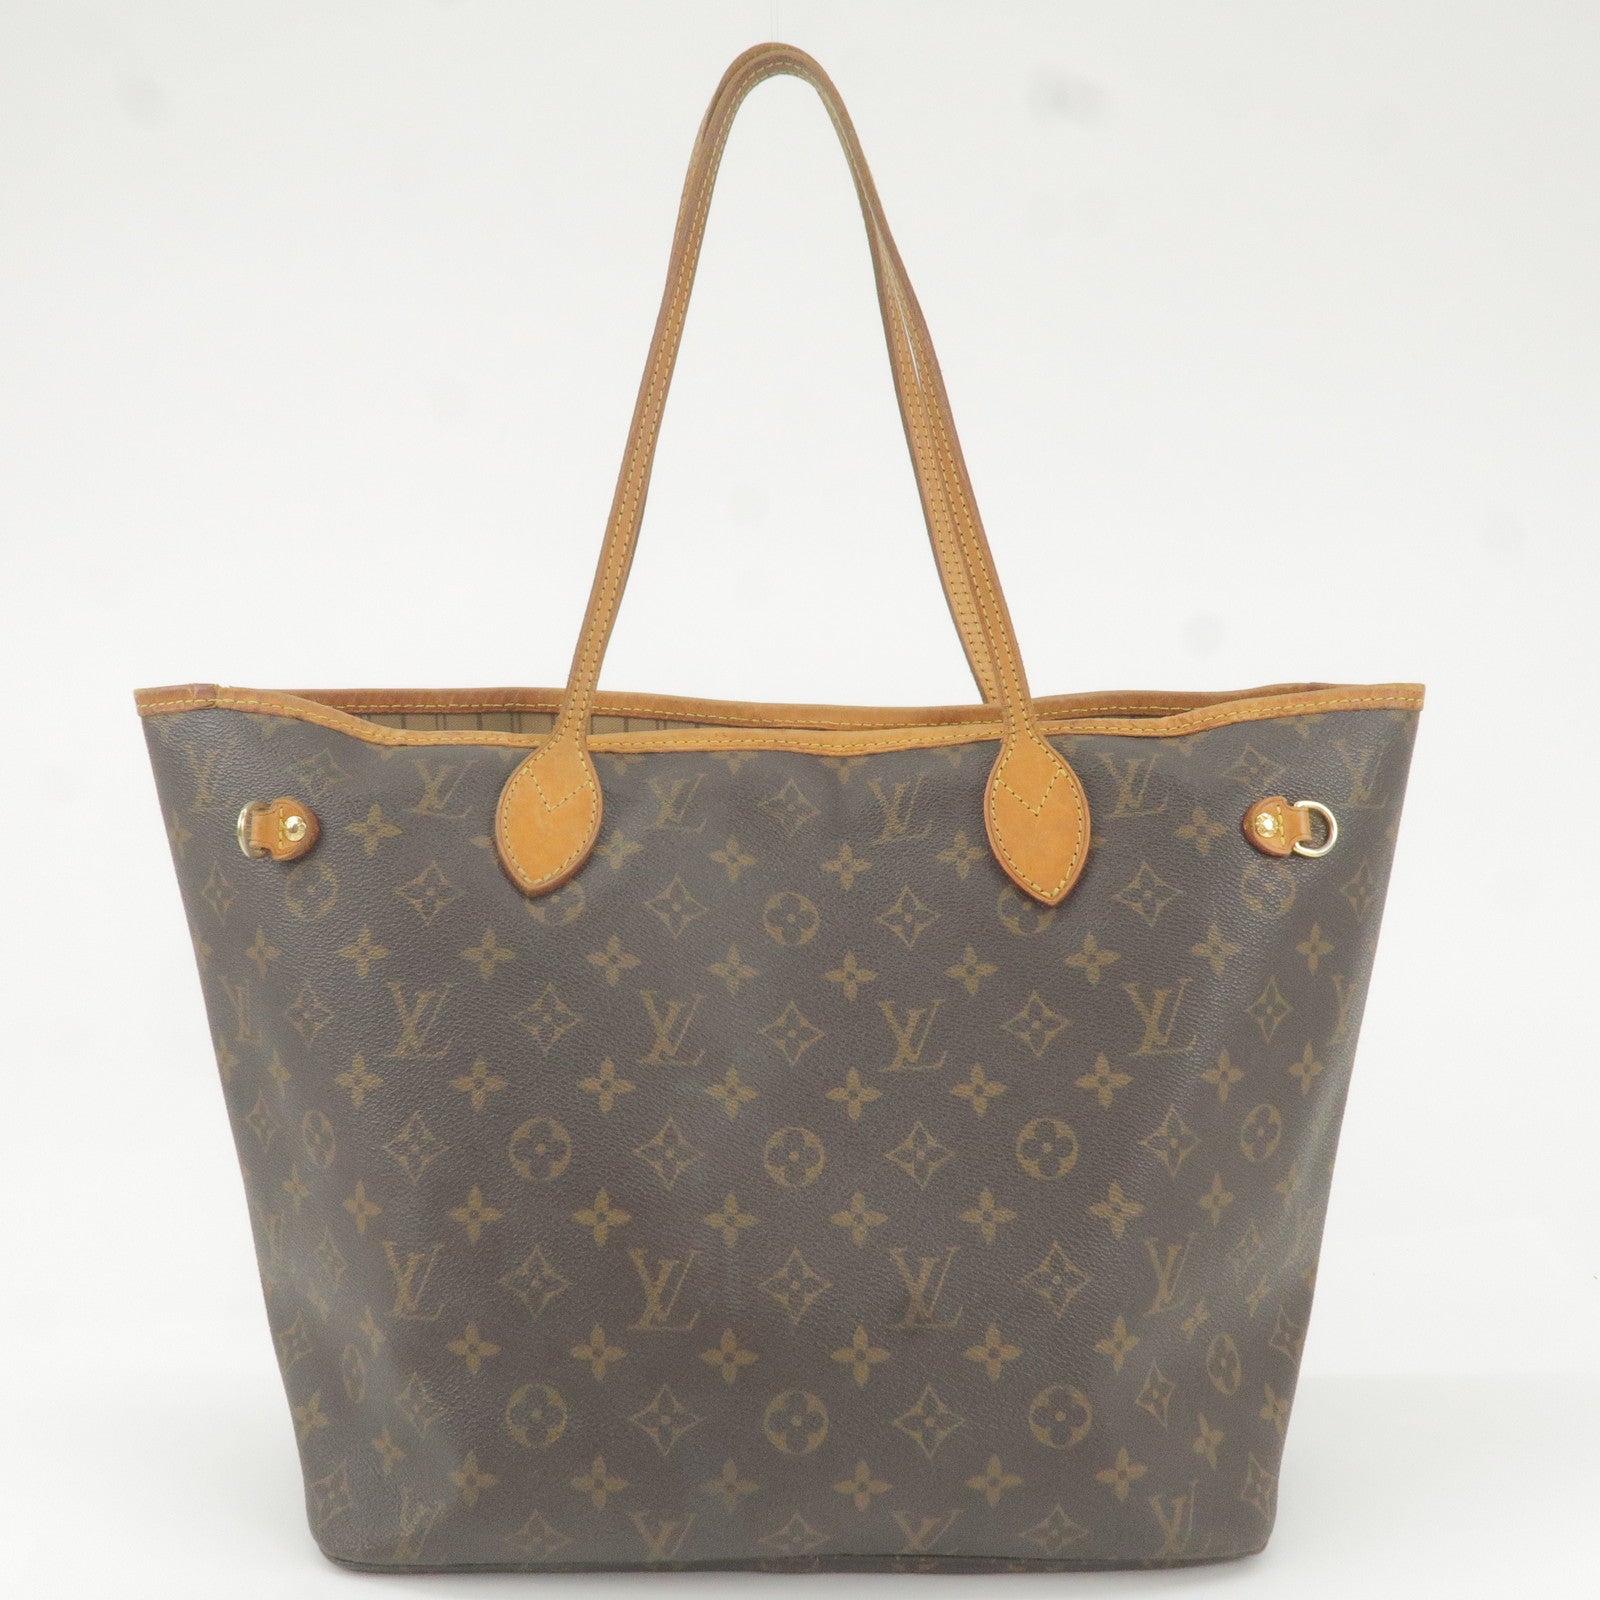 Louis Vuitton Carryall handbag in monogram canvas and natural leather